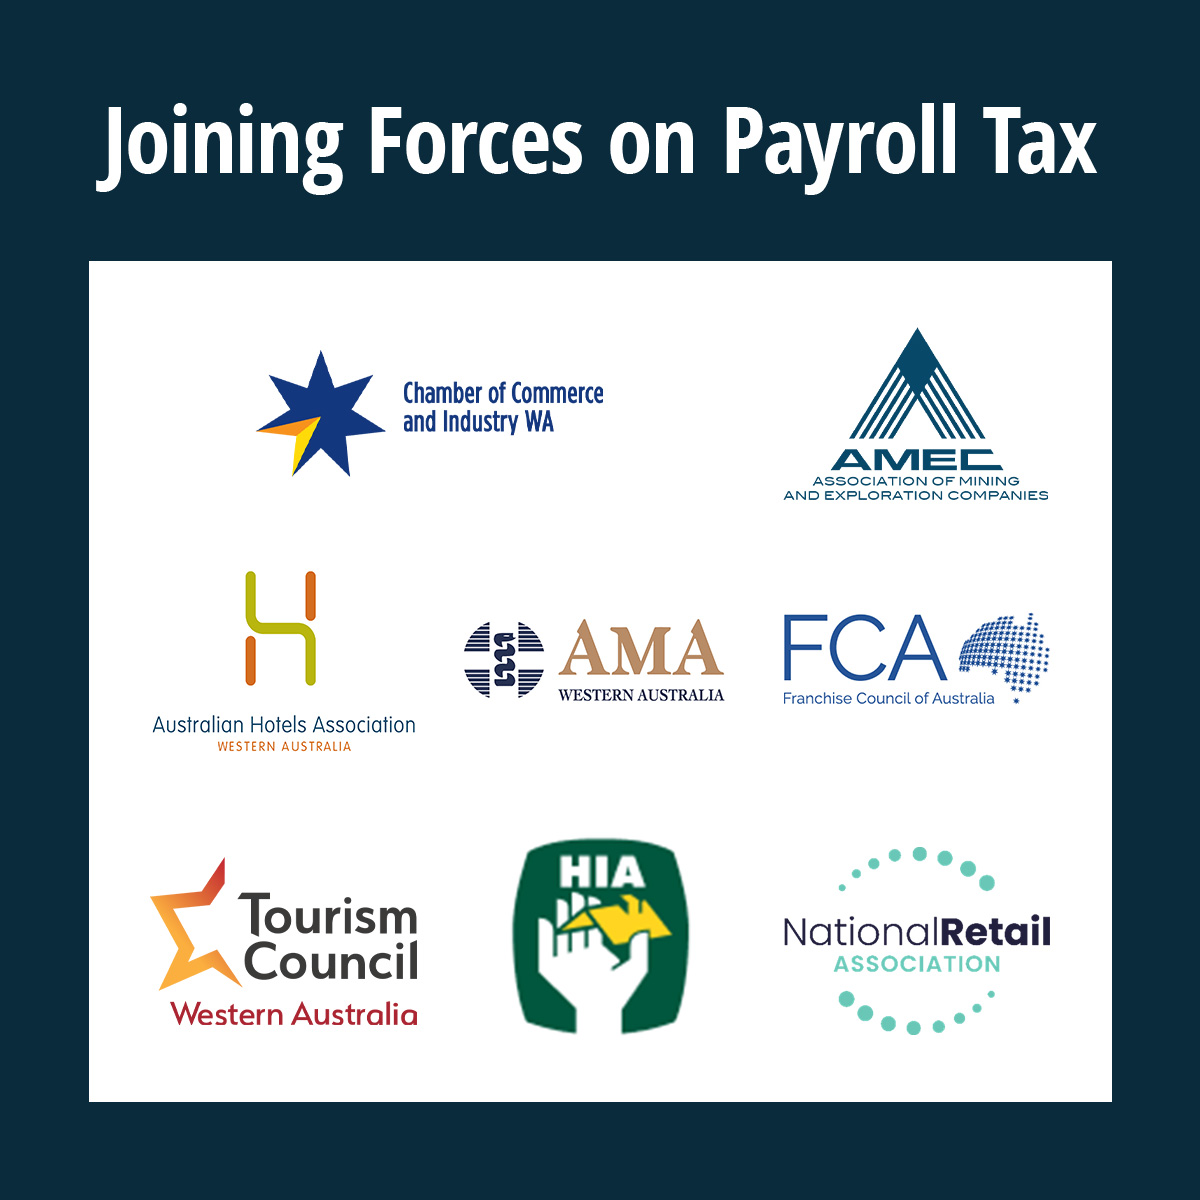 CCIWA joins key groups in payroll tax fight